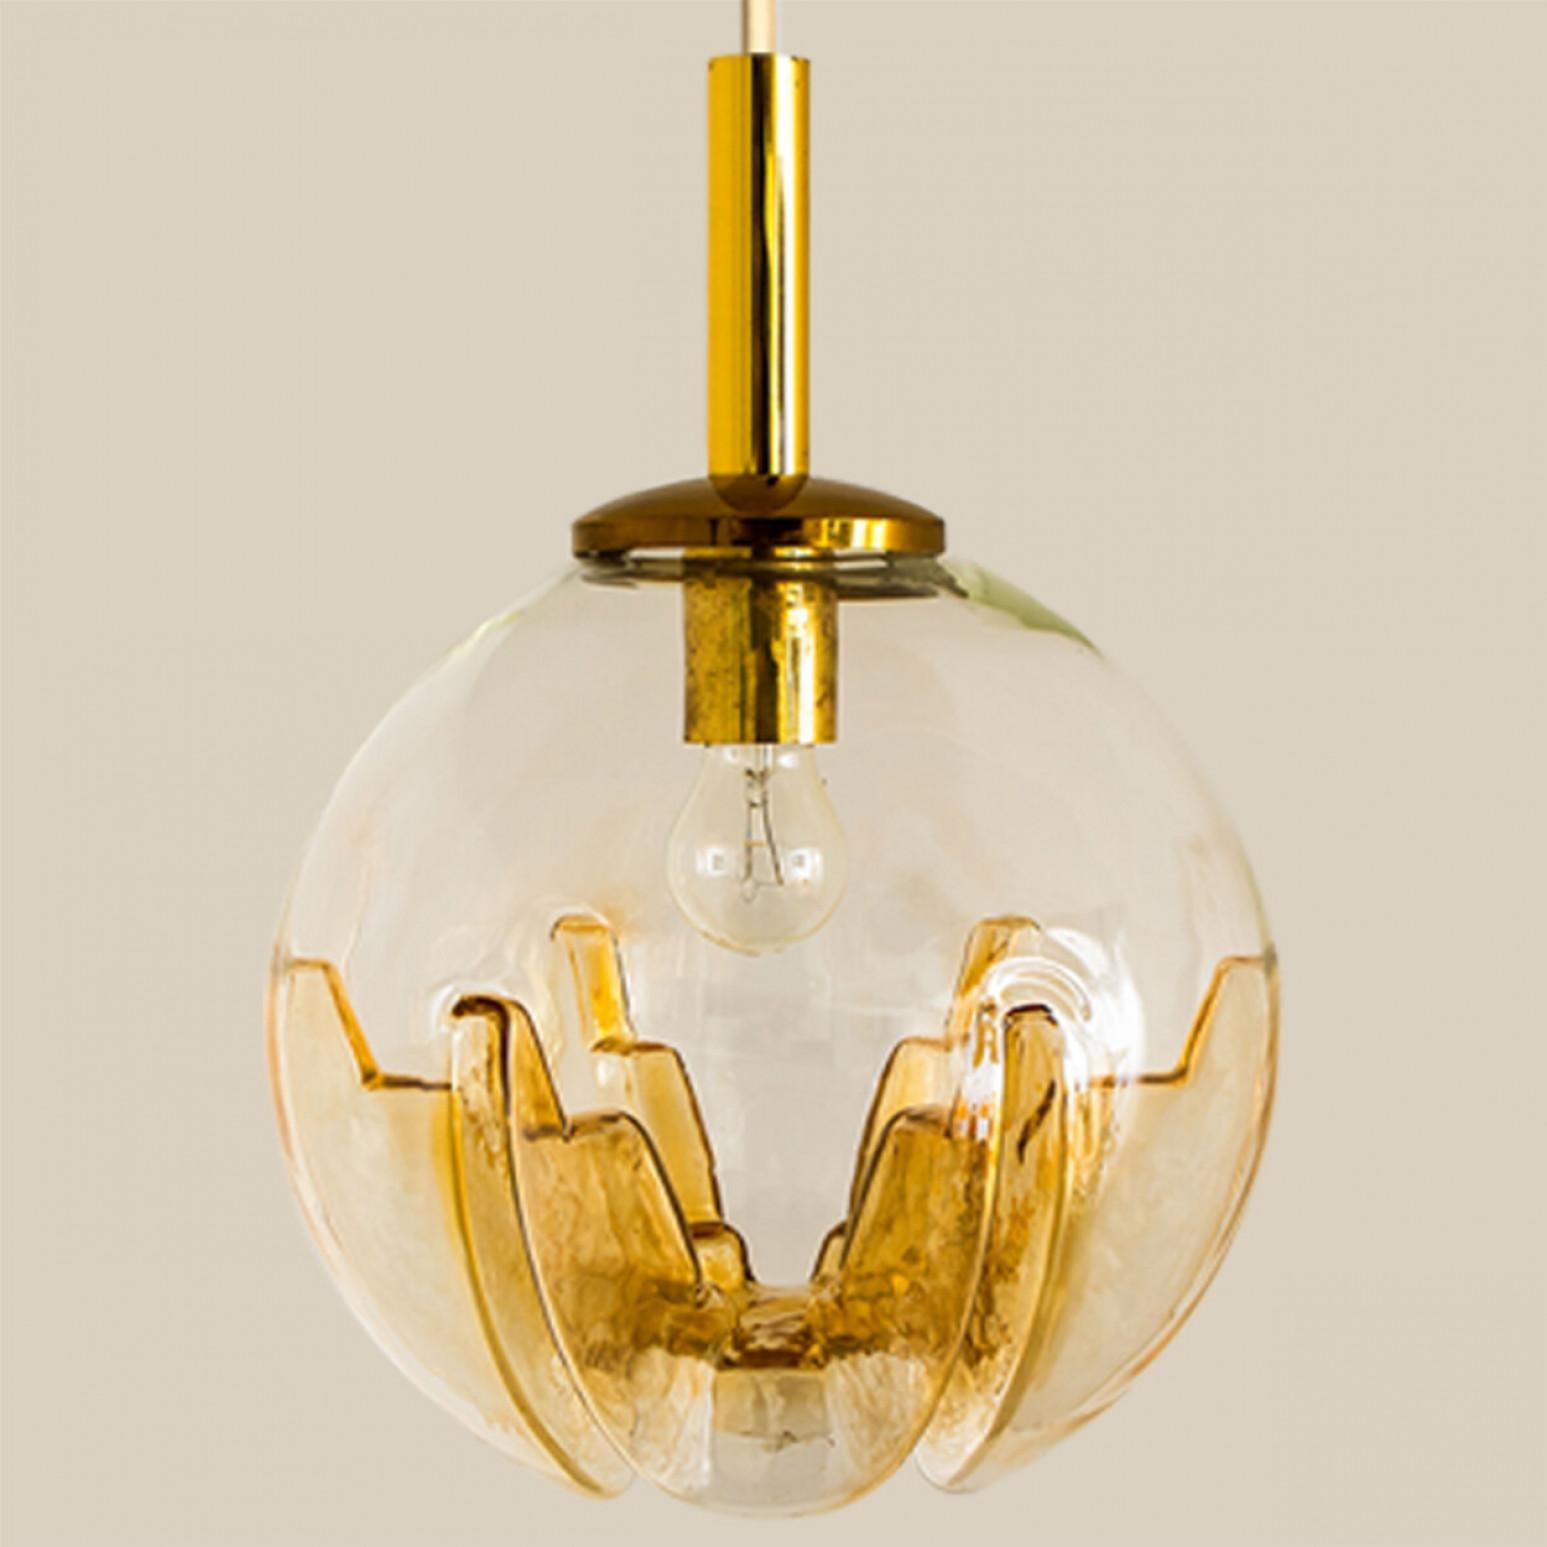 A collection of beautiful and stylish glass pendant lights made in Germany and Italy around the 1960's. The Doria light is made of yellow clear glass in a bubble shape. The Kaiser light is made of clear red-brown glass and the Mazzega light is